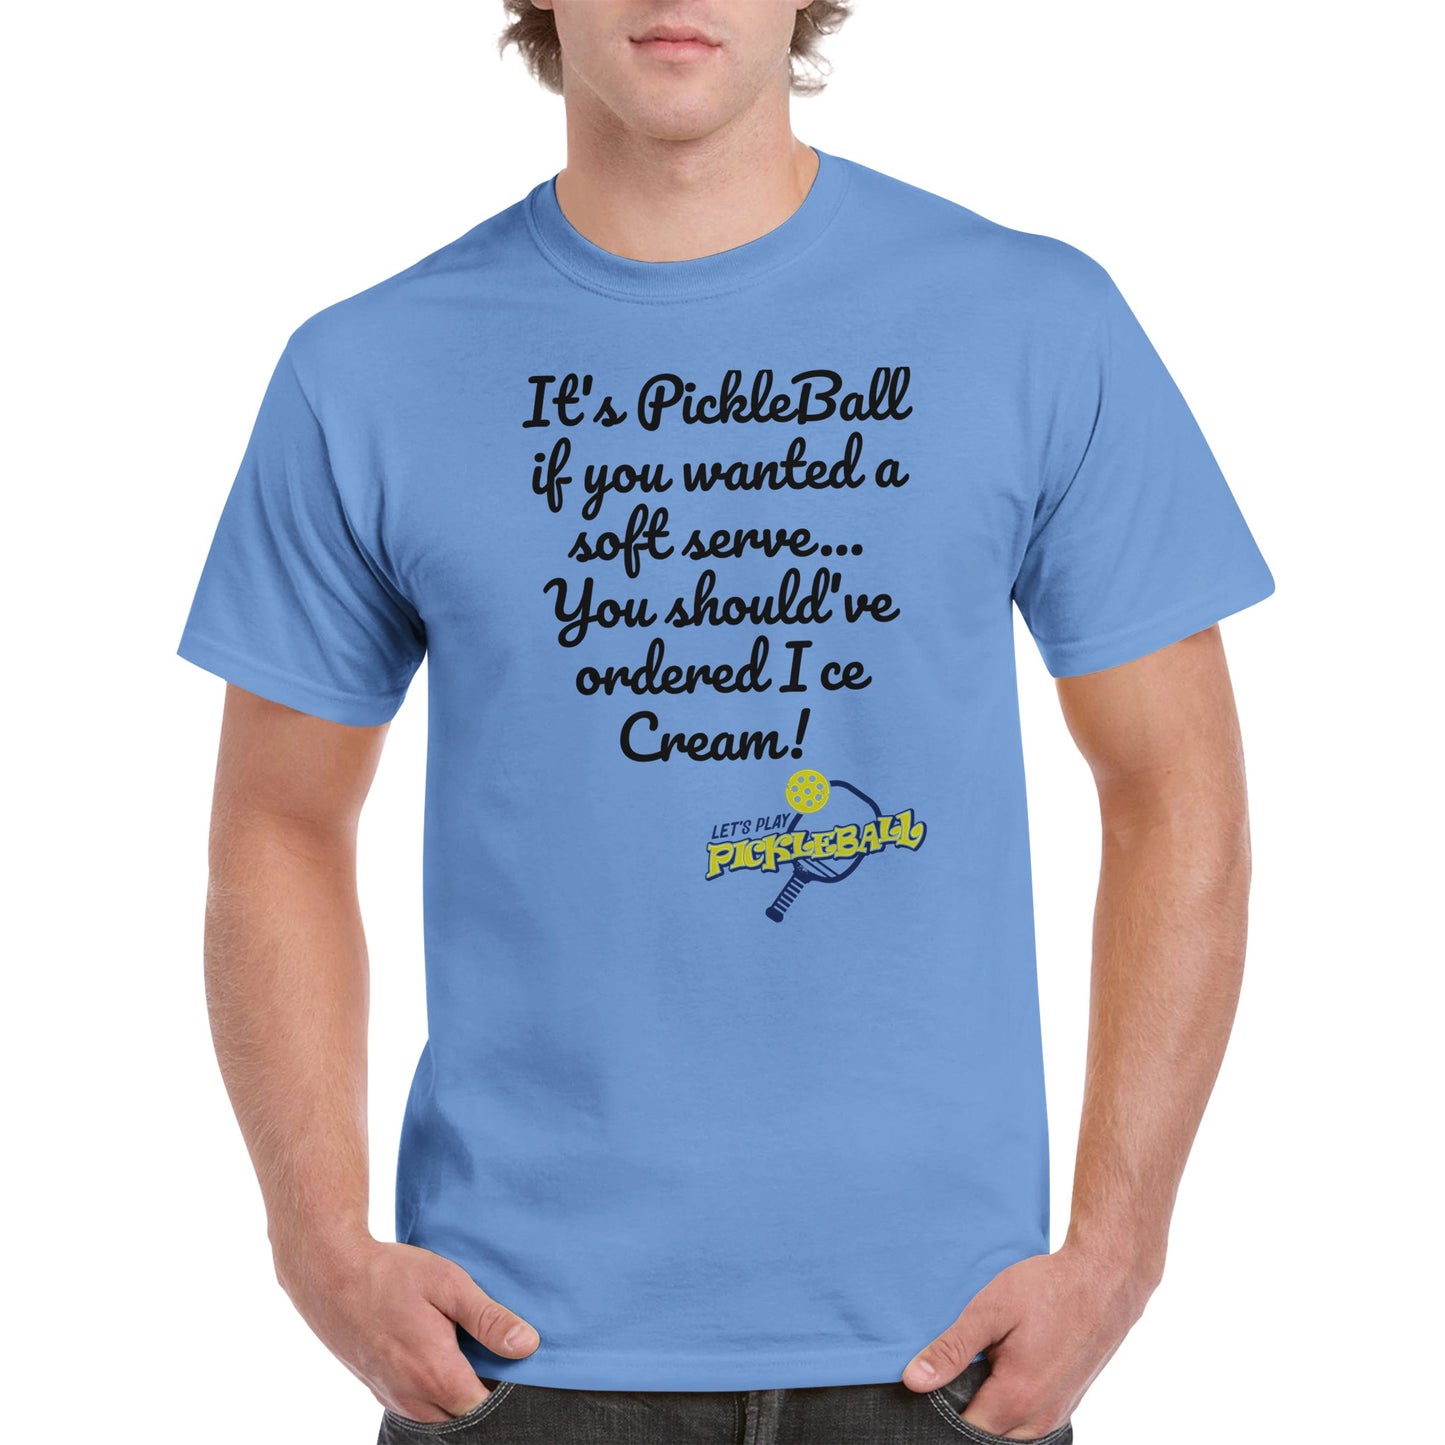 Carolina Blue Unisex Crewneck heavyweight cotton t-shirt with funny saying It’s PickleBall if you wanted a soft serve… You should’ve ordered Ice Cream! and Let’s Play Pickleball logo on the front from WhatYa Say Apparel worn by blonde-haired male front view.